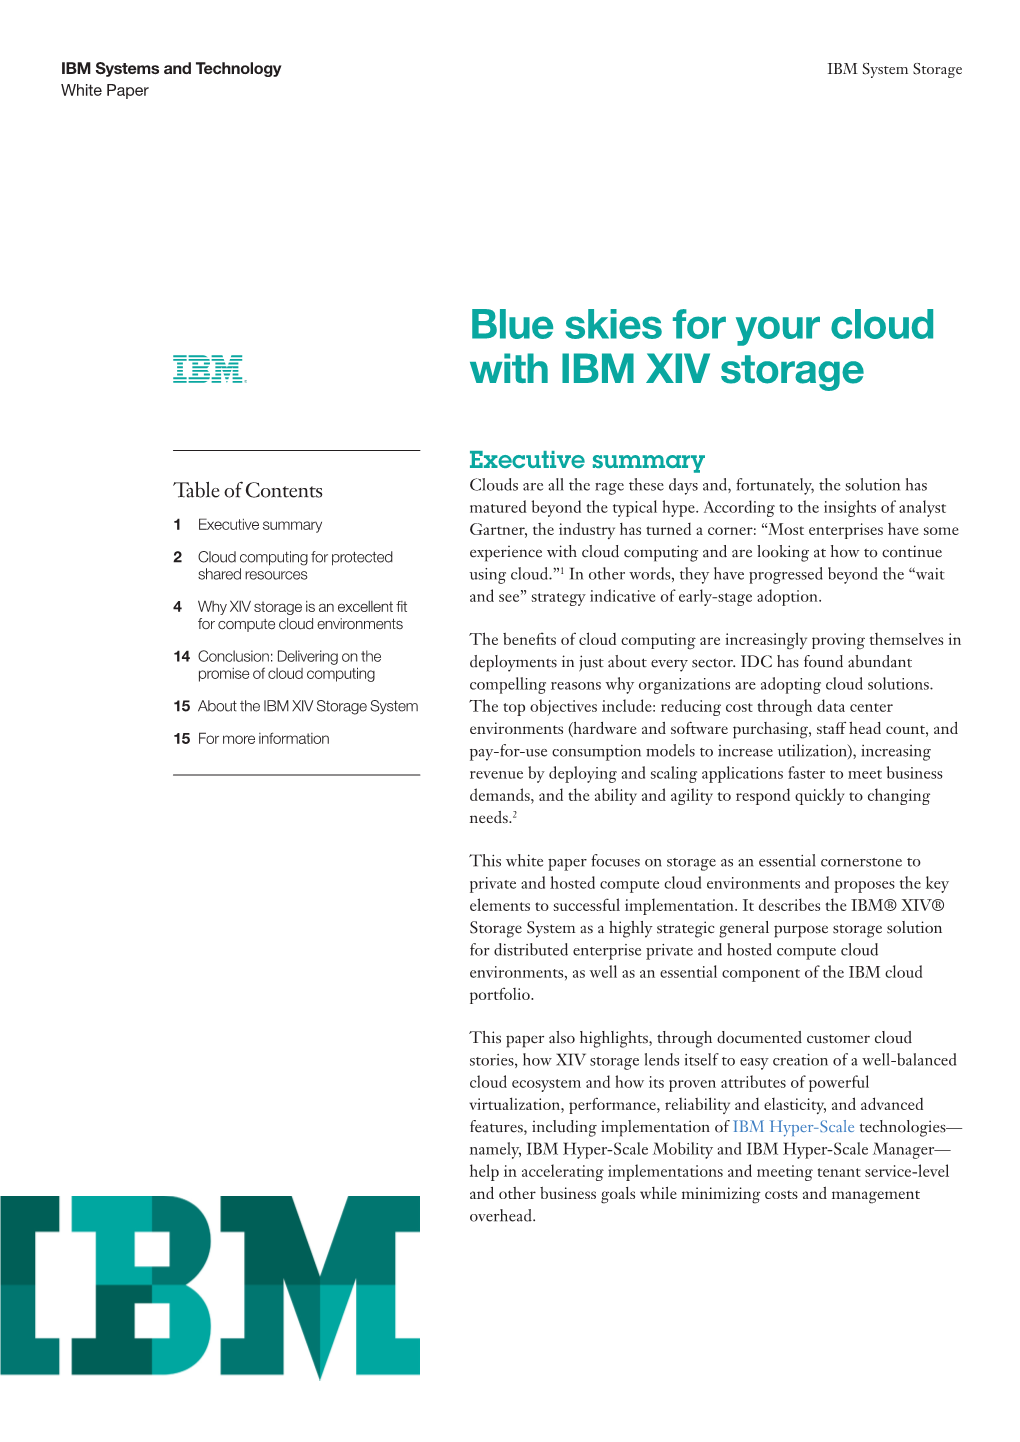 Blue Skies for Your Cloud with IBM XIV Storage